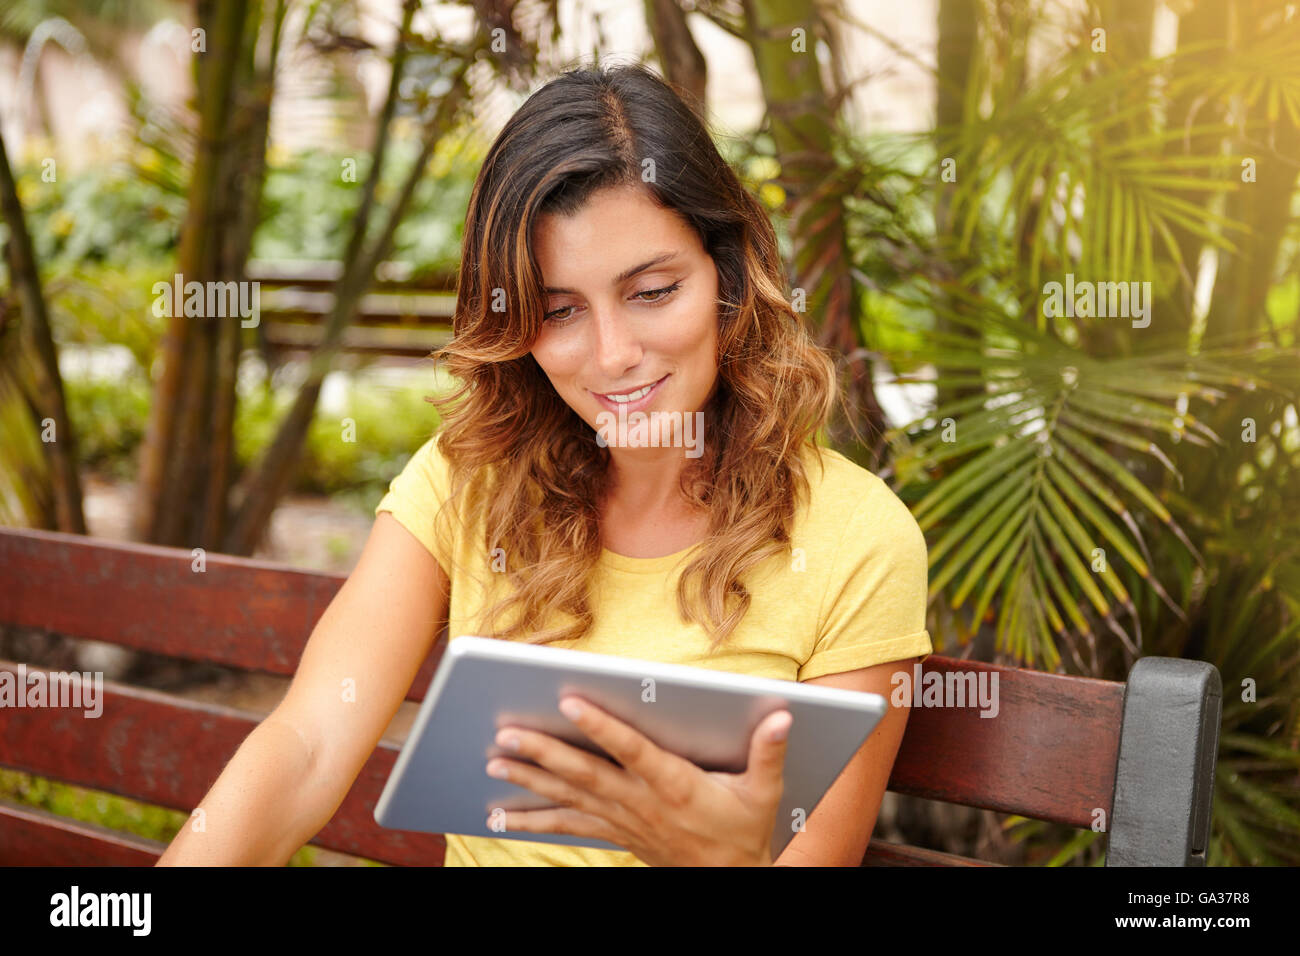 Young lady with medium-length hair toothy smiling while using tablet outdoors Stock Photo